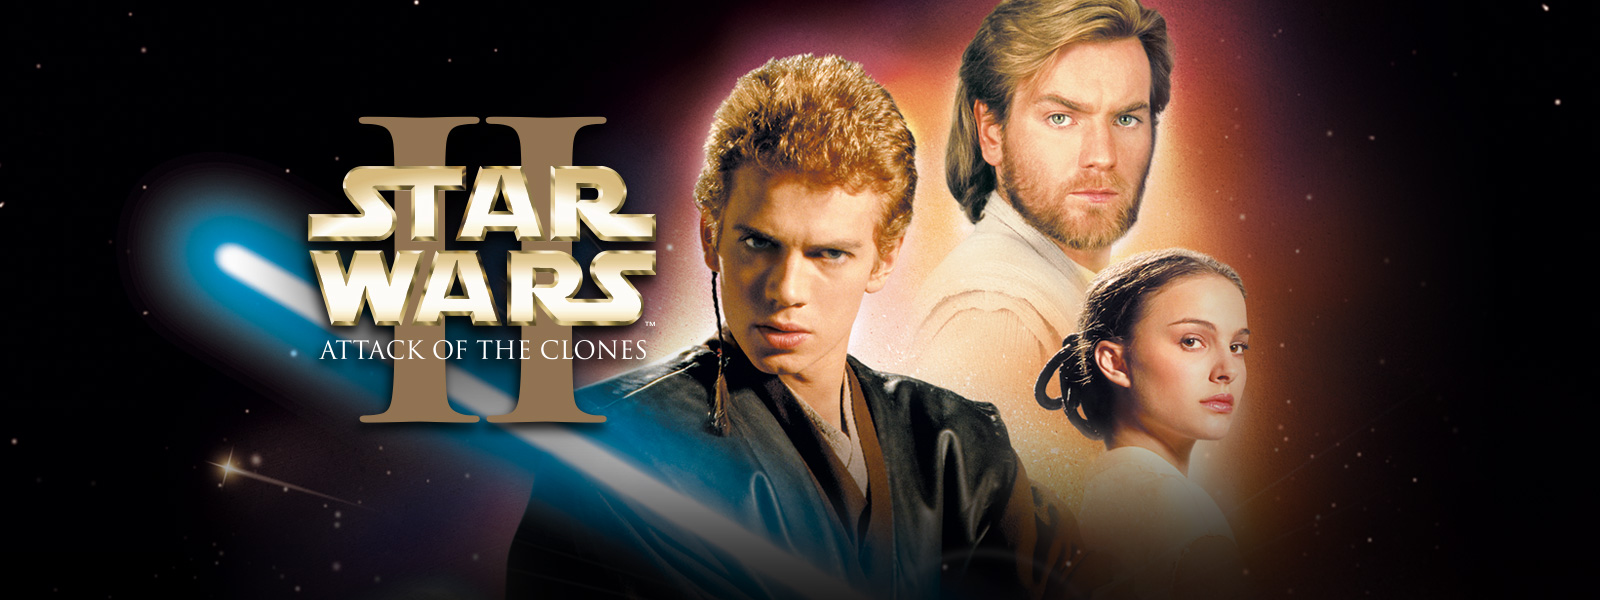 High Resolution Wallpaper | Star Wars Episode II: Attack Of The Clones 1600x600 px